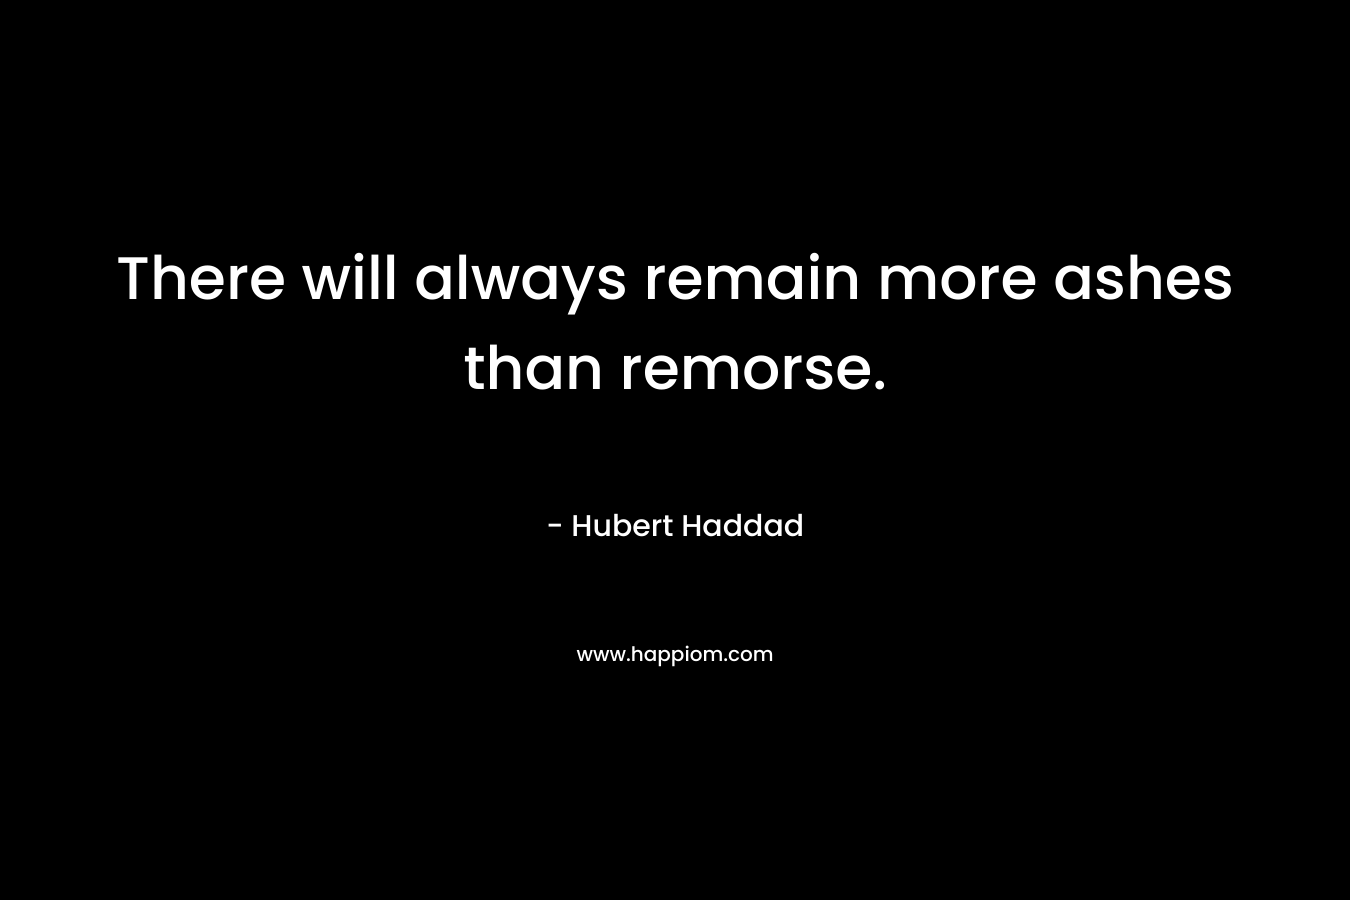 There will always remain more ashes than remorse. – Hubert Haddad